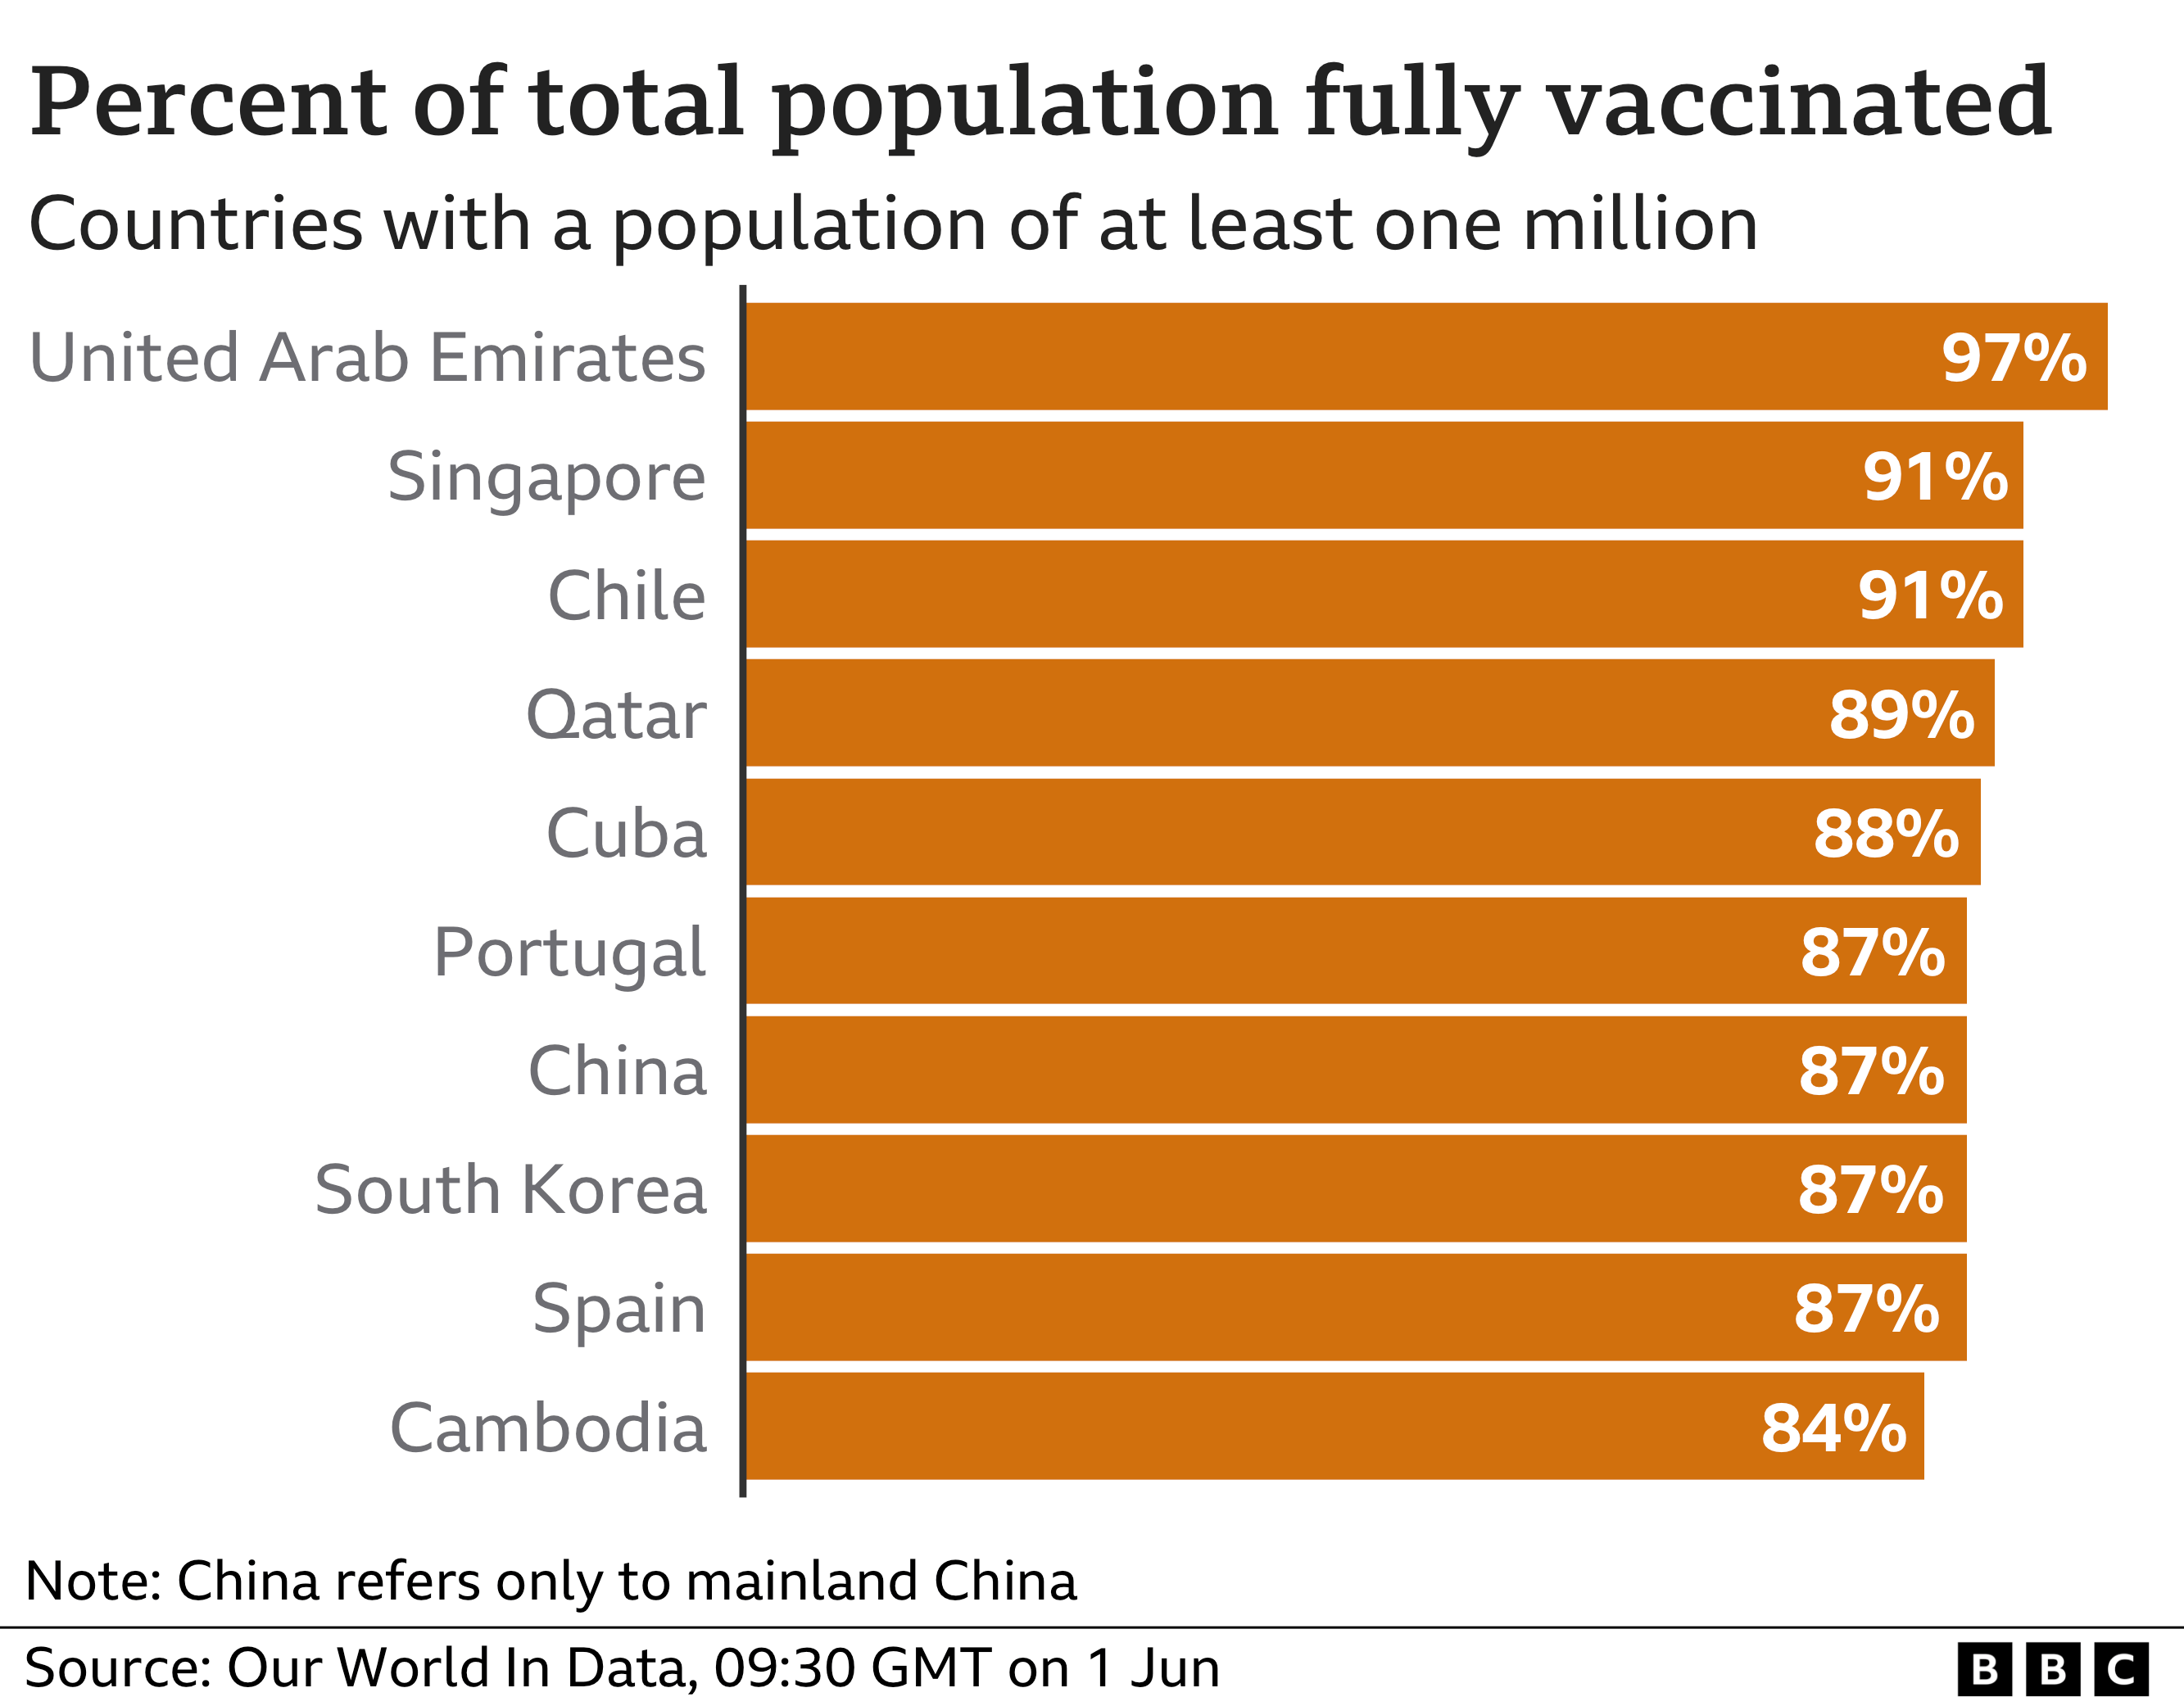 Chart showing the countries with the highest percentage of total population given at least one dose in countries with - only those with over one million people living there are included. The UAE is at the top with 97%